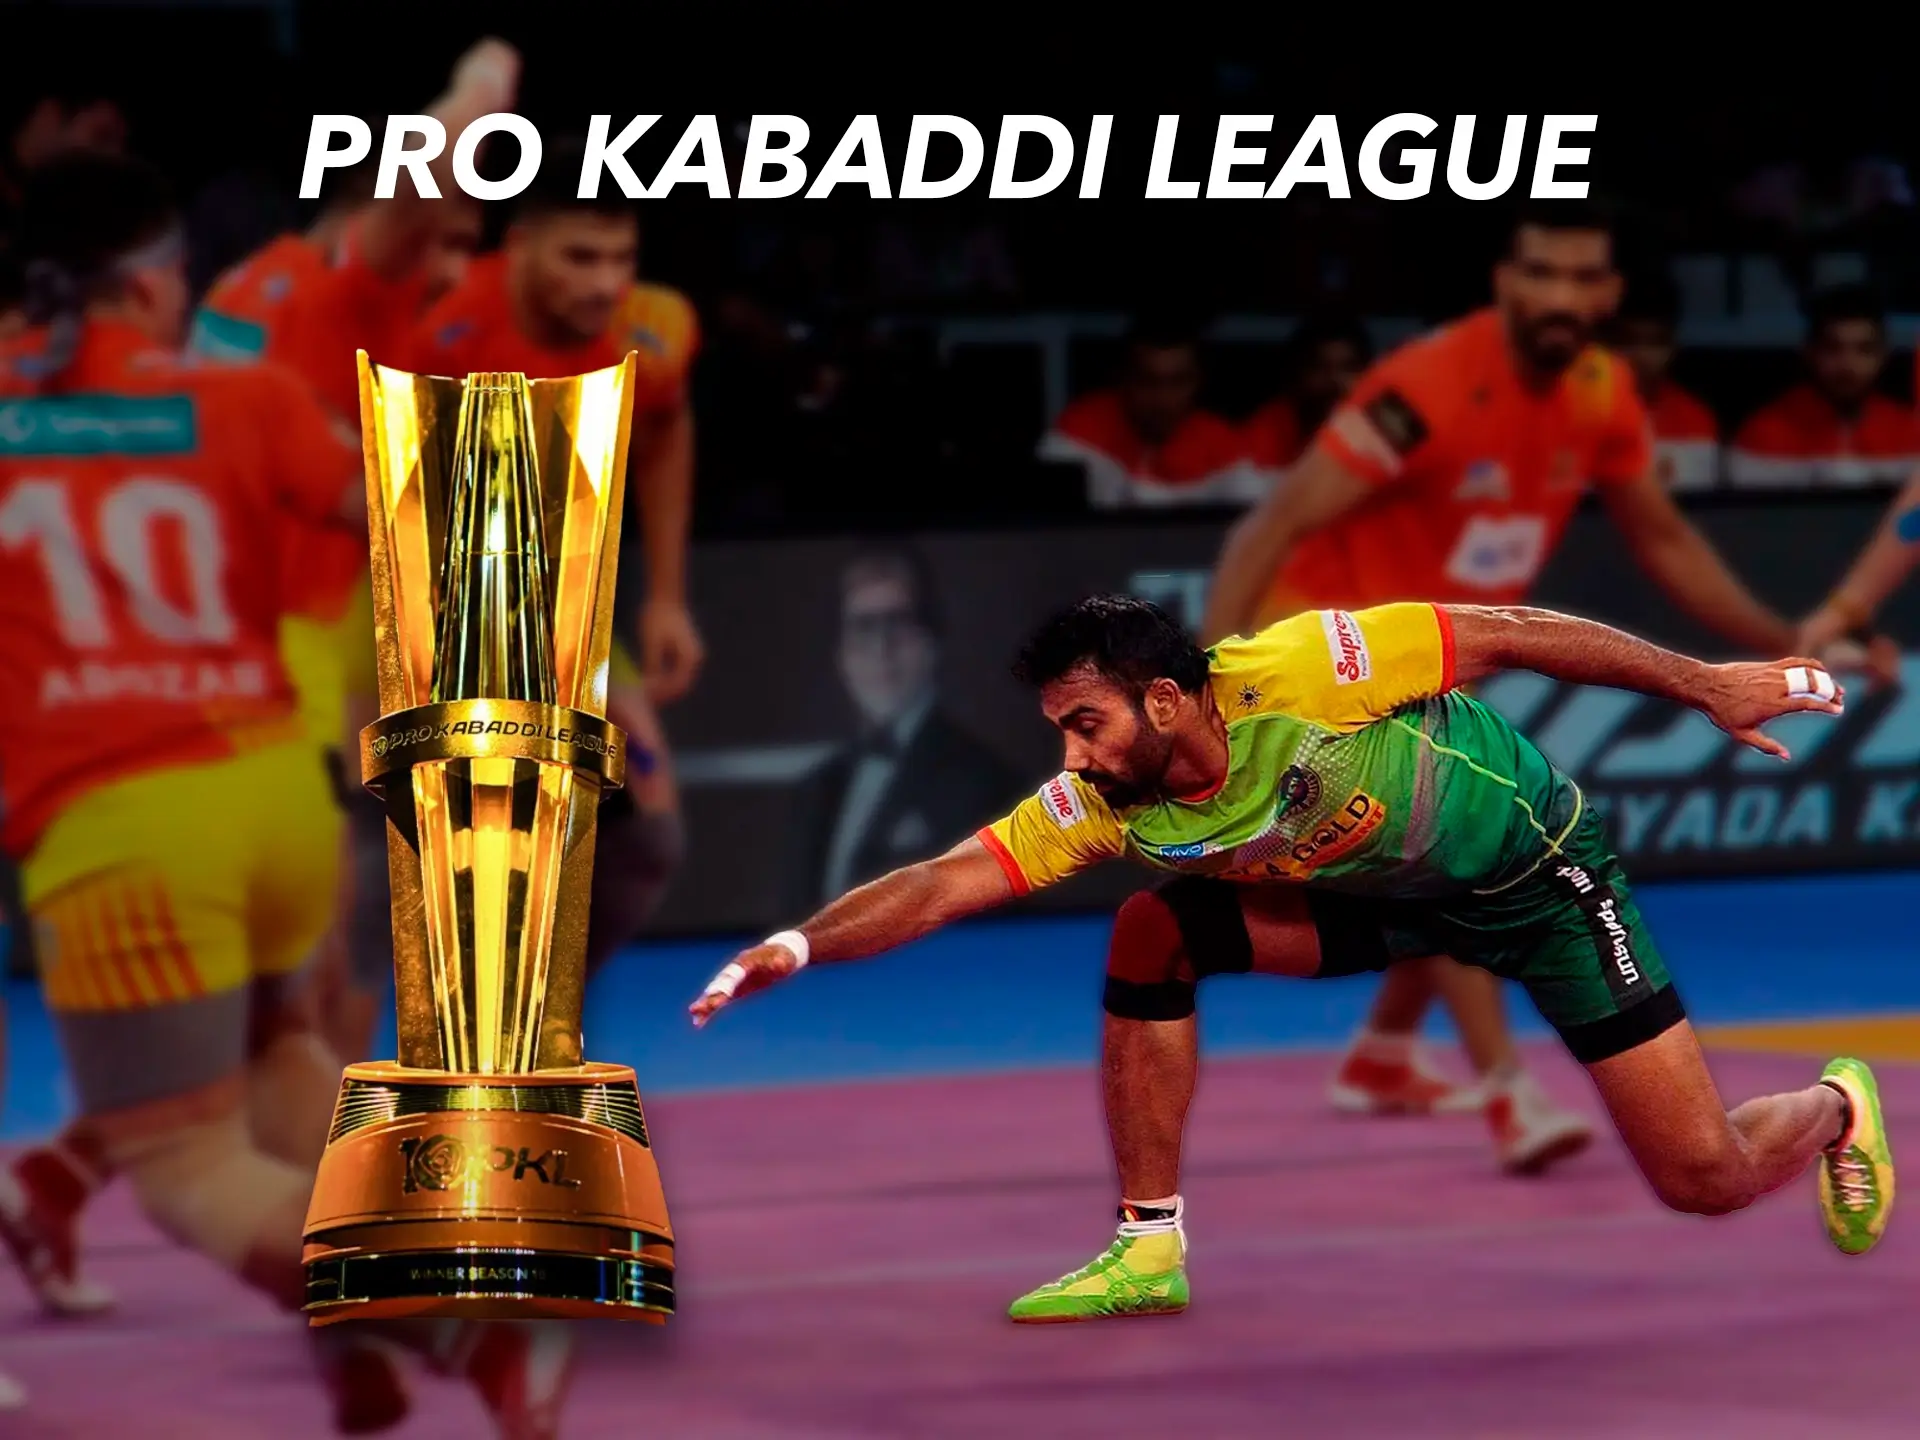 Use your knowledge when betting on the Kabaddi Pro League Cup.